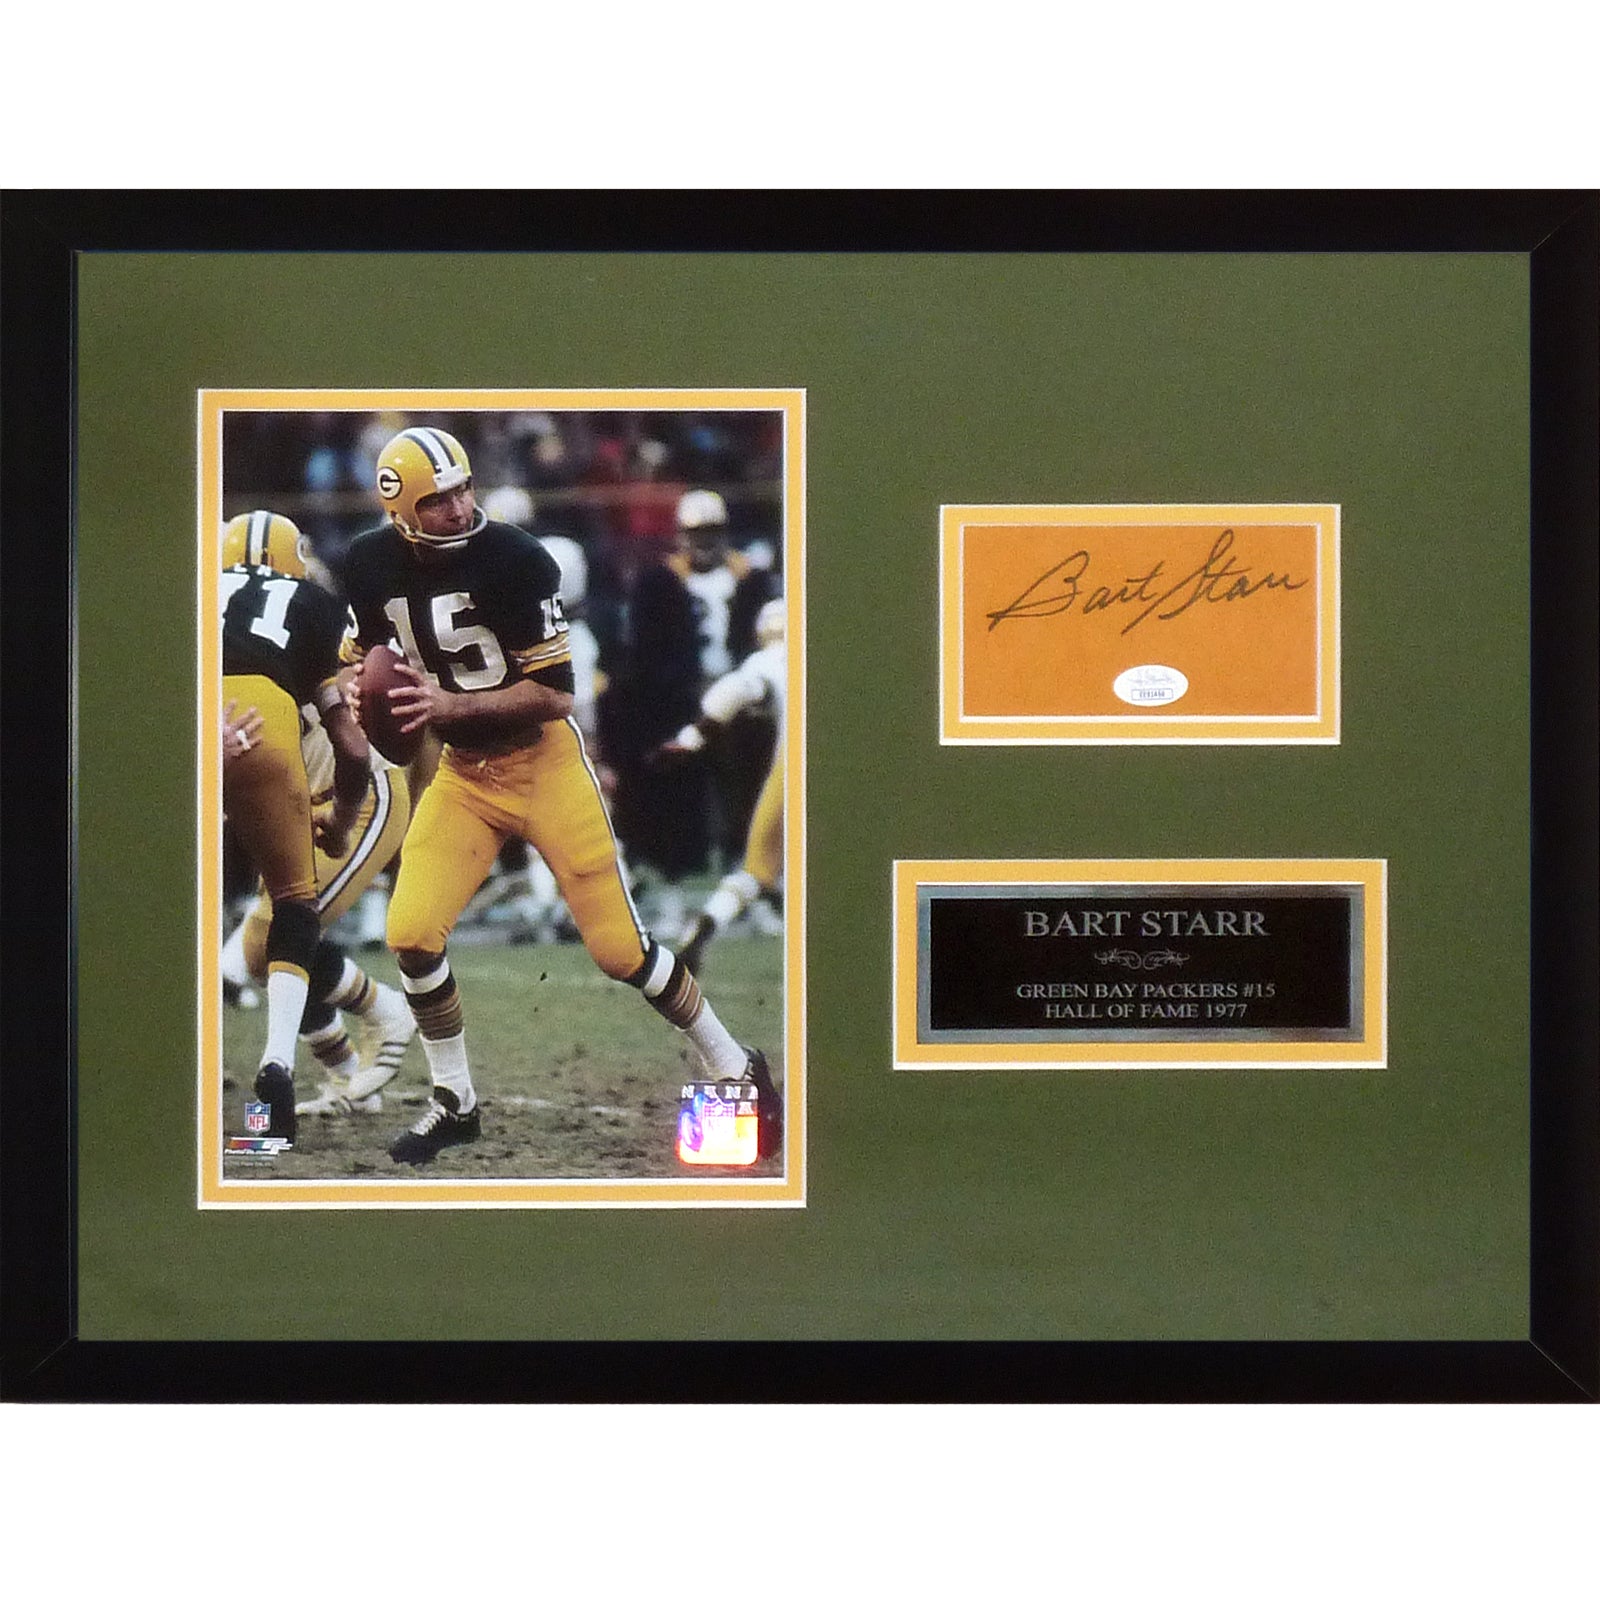 Bart Starr Autographed Green Bay Packers Deluxe Tribute Framed Piece - JSA